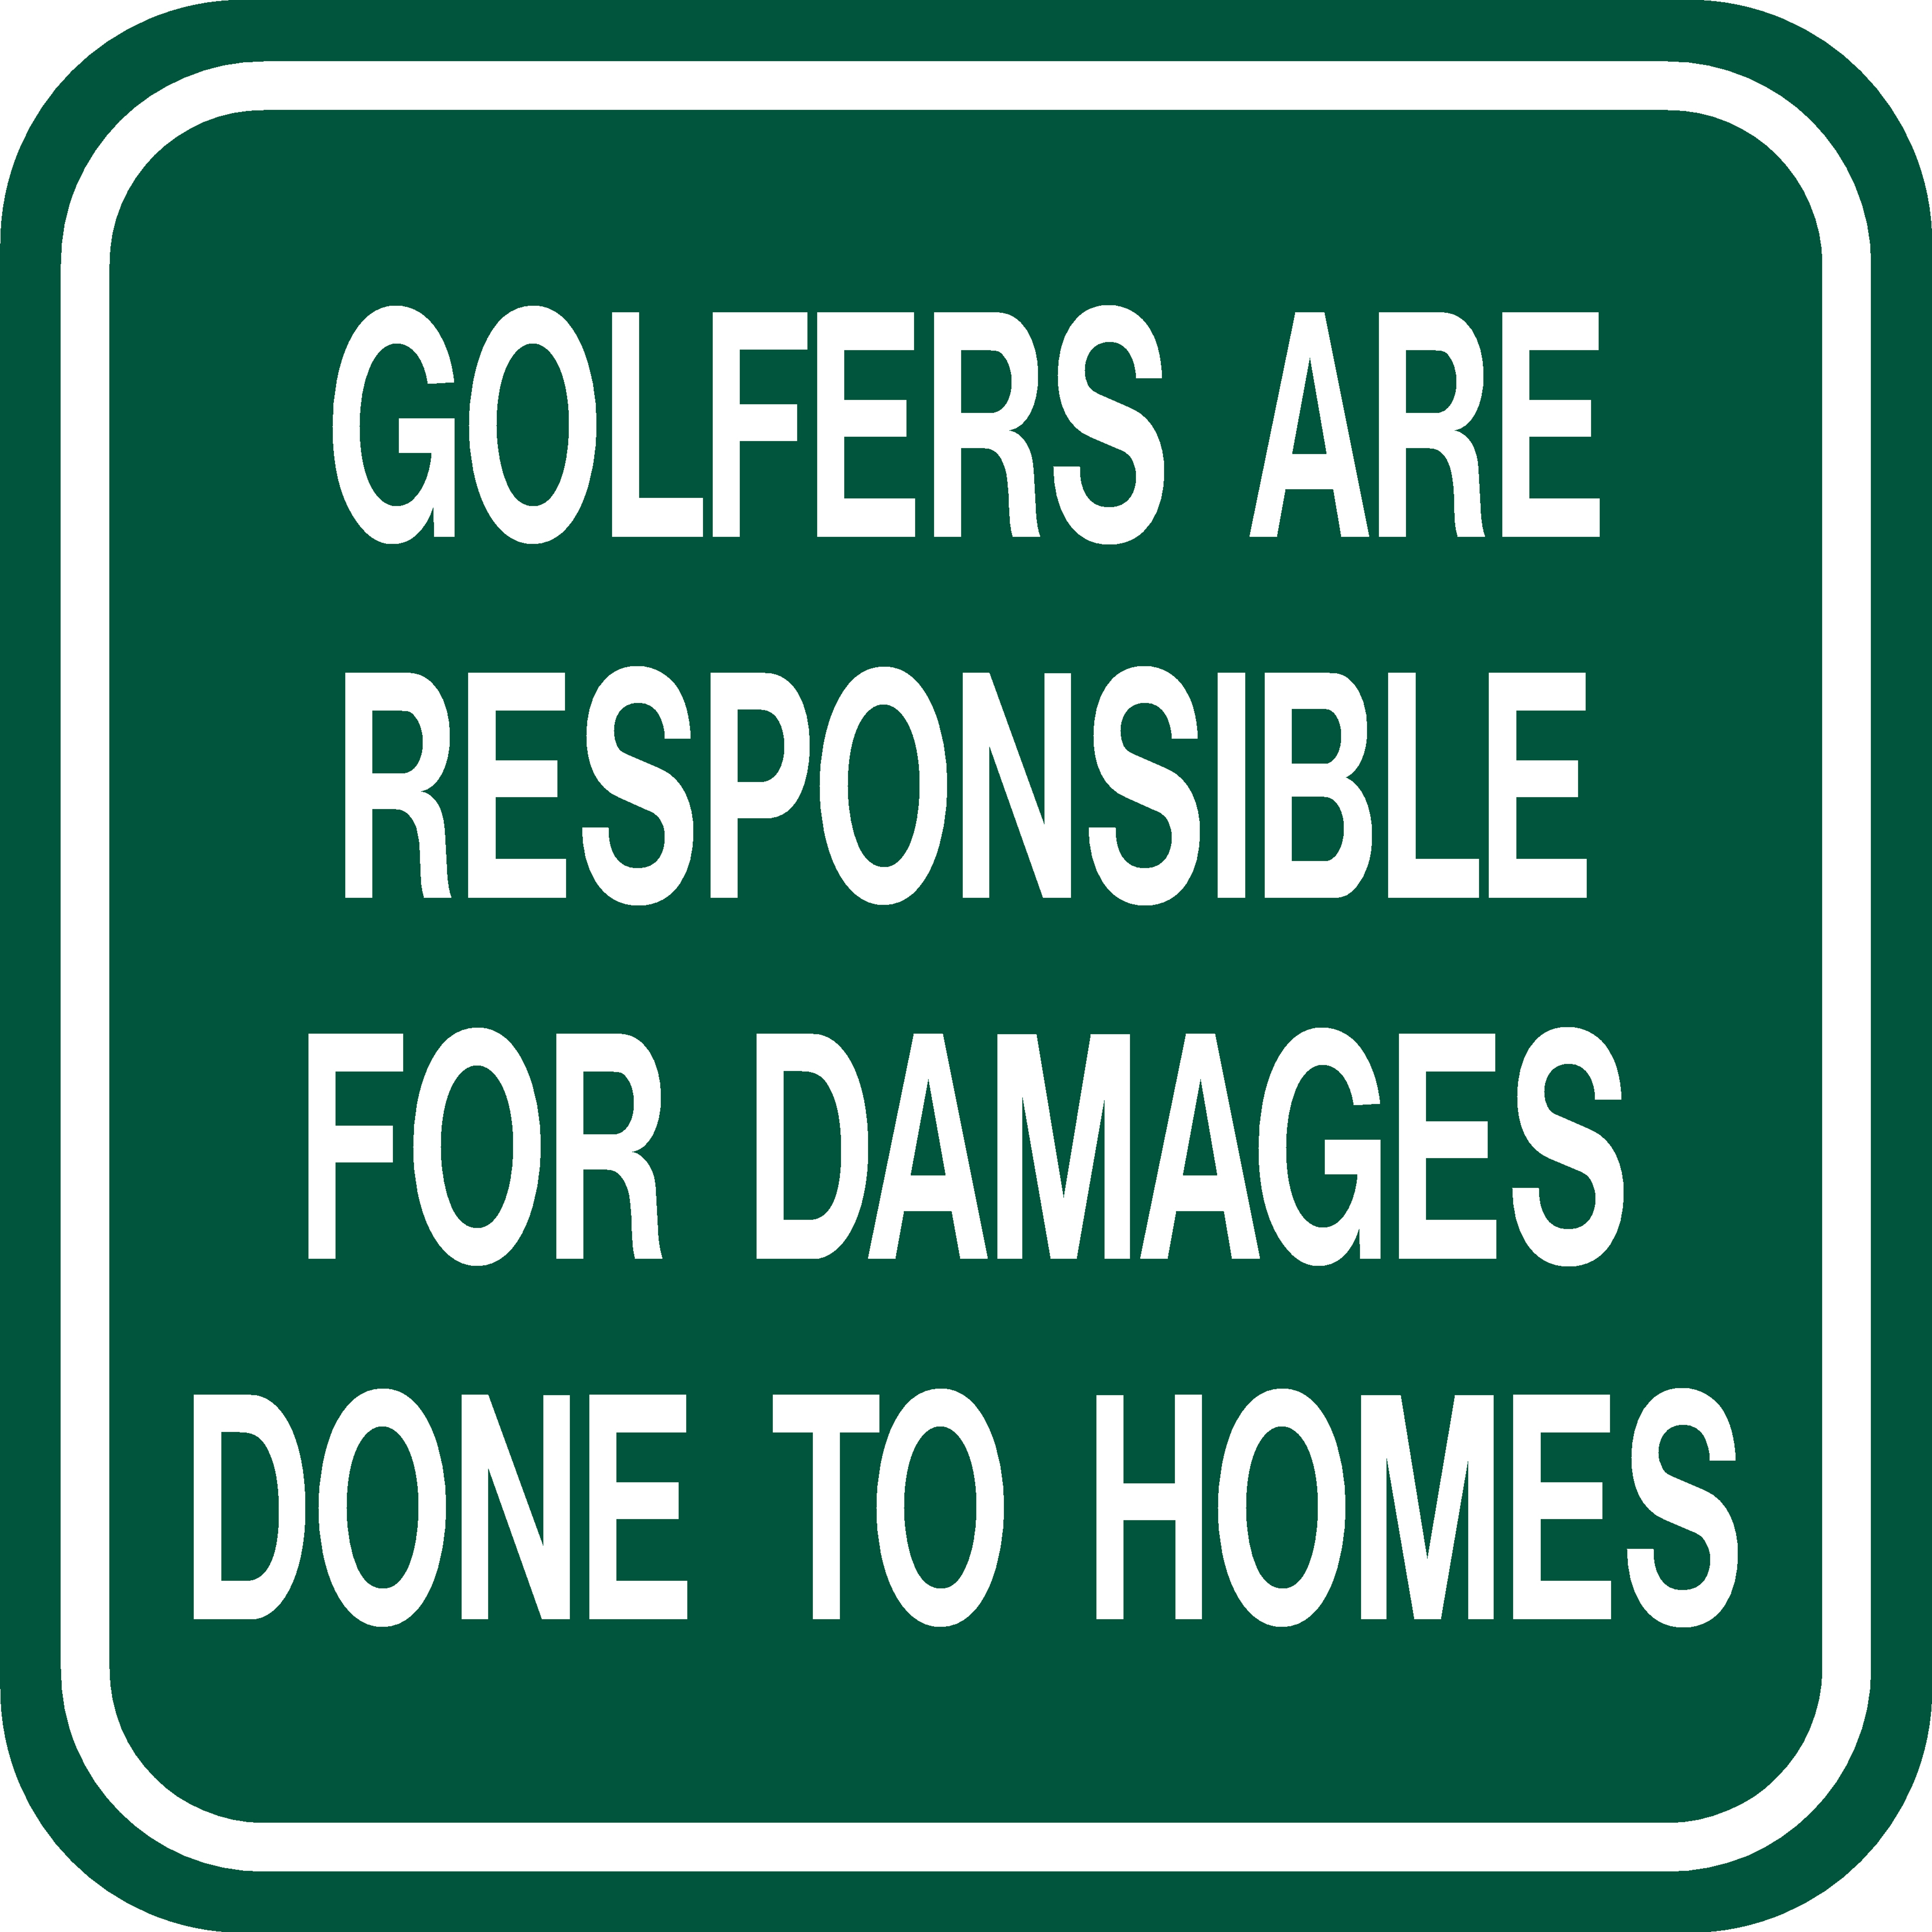 Image of Golfers Are Responsible Sign in green with white border and text